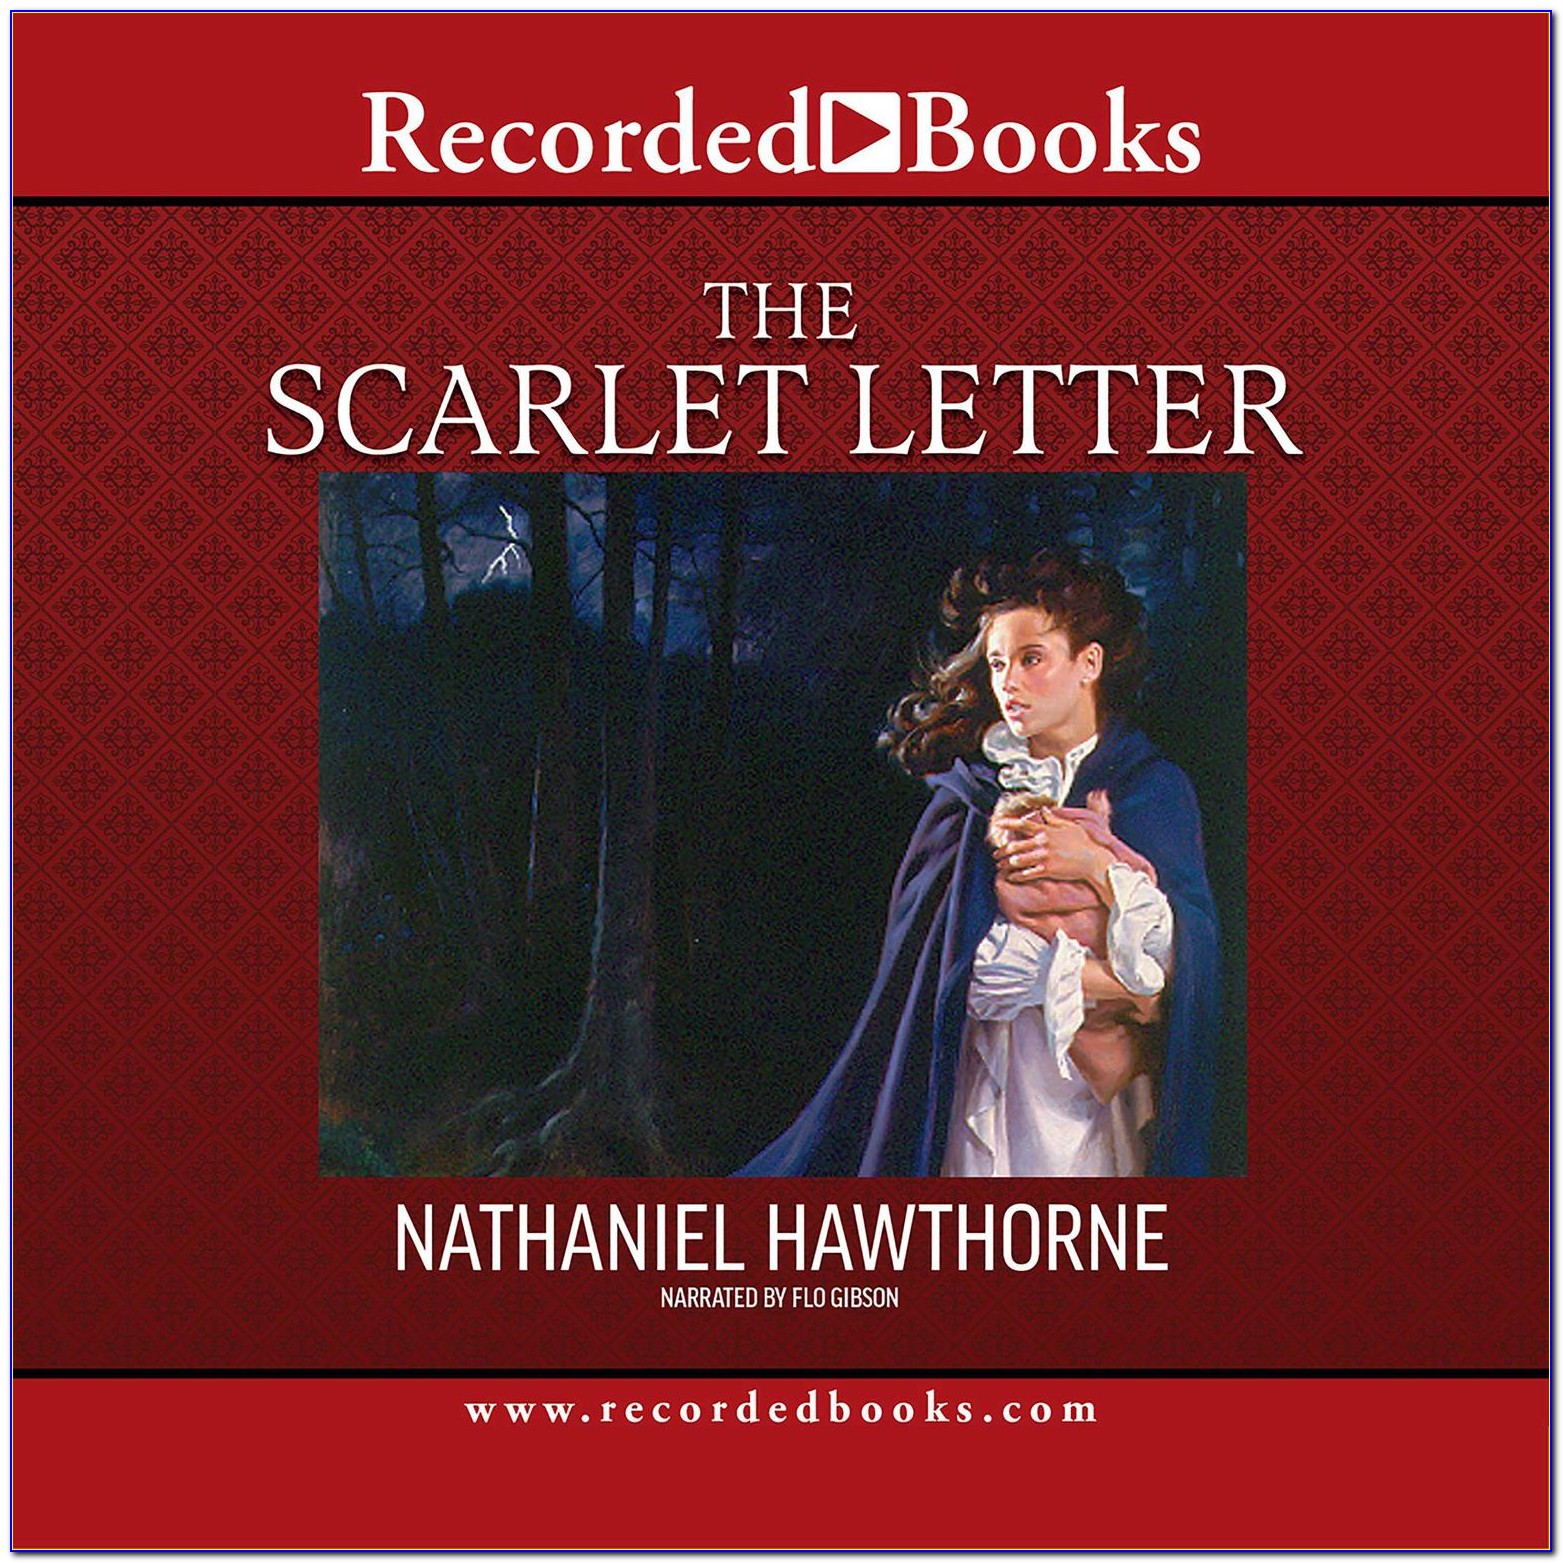 The Scarlet Letter Audiobook Chapter 2